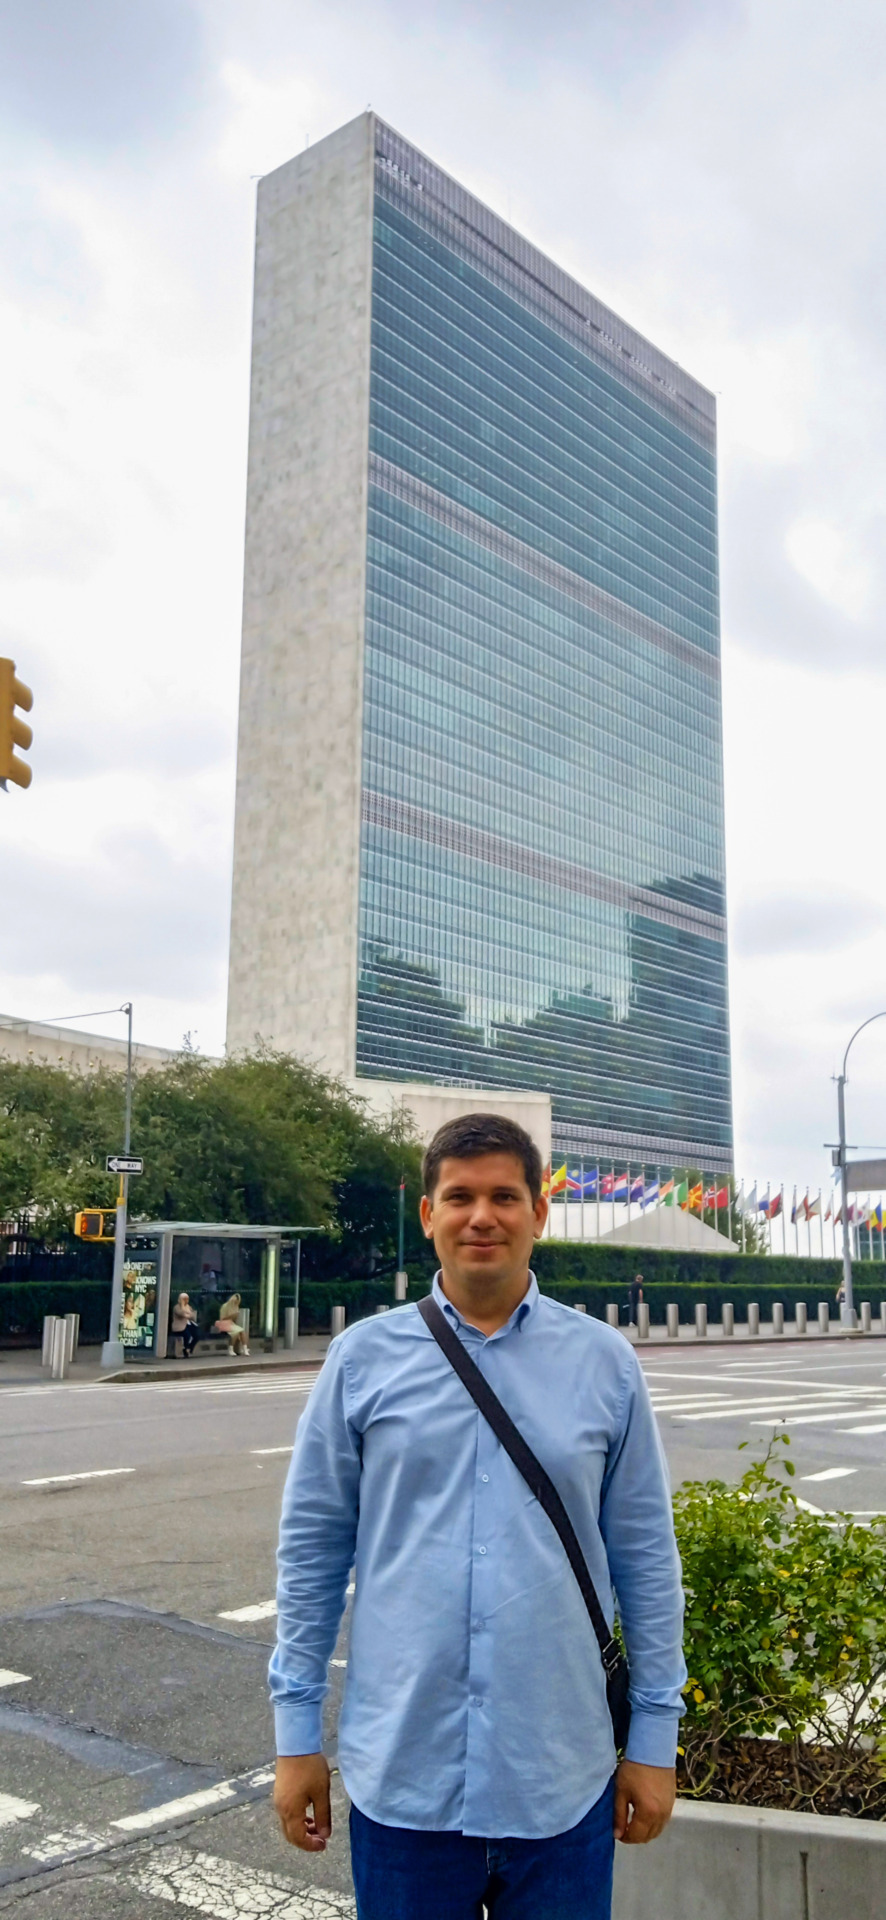 A Visit to the United Nations